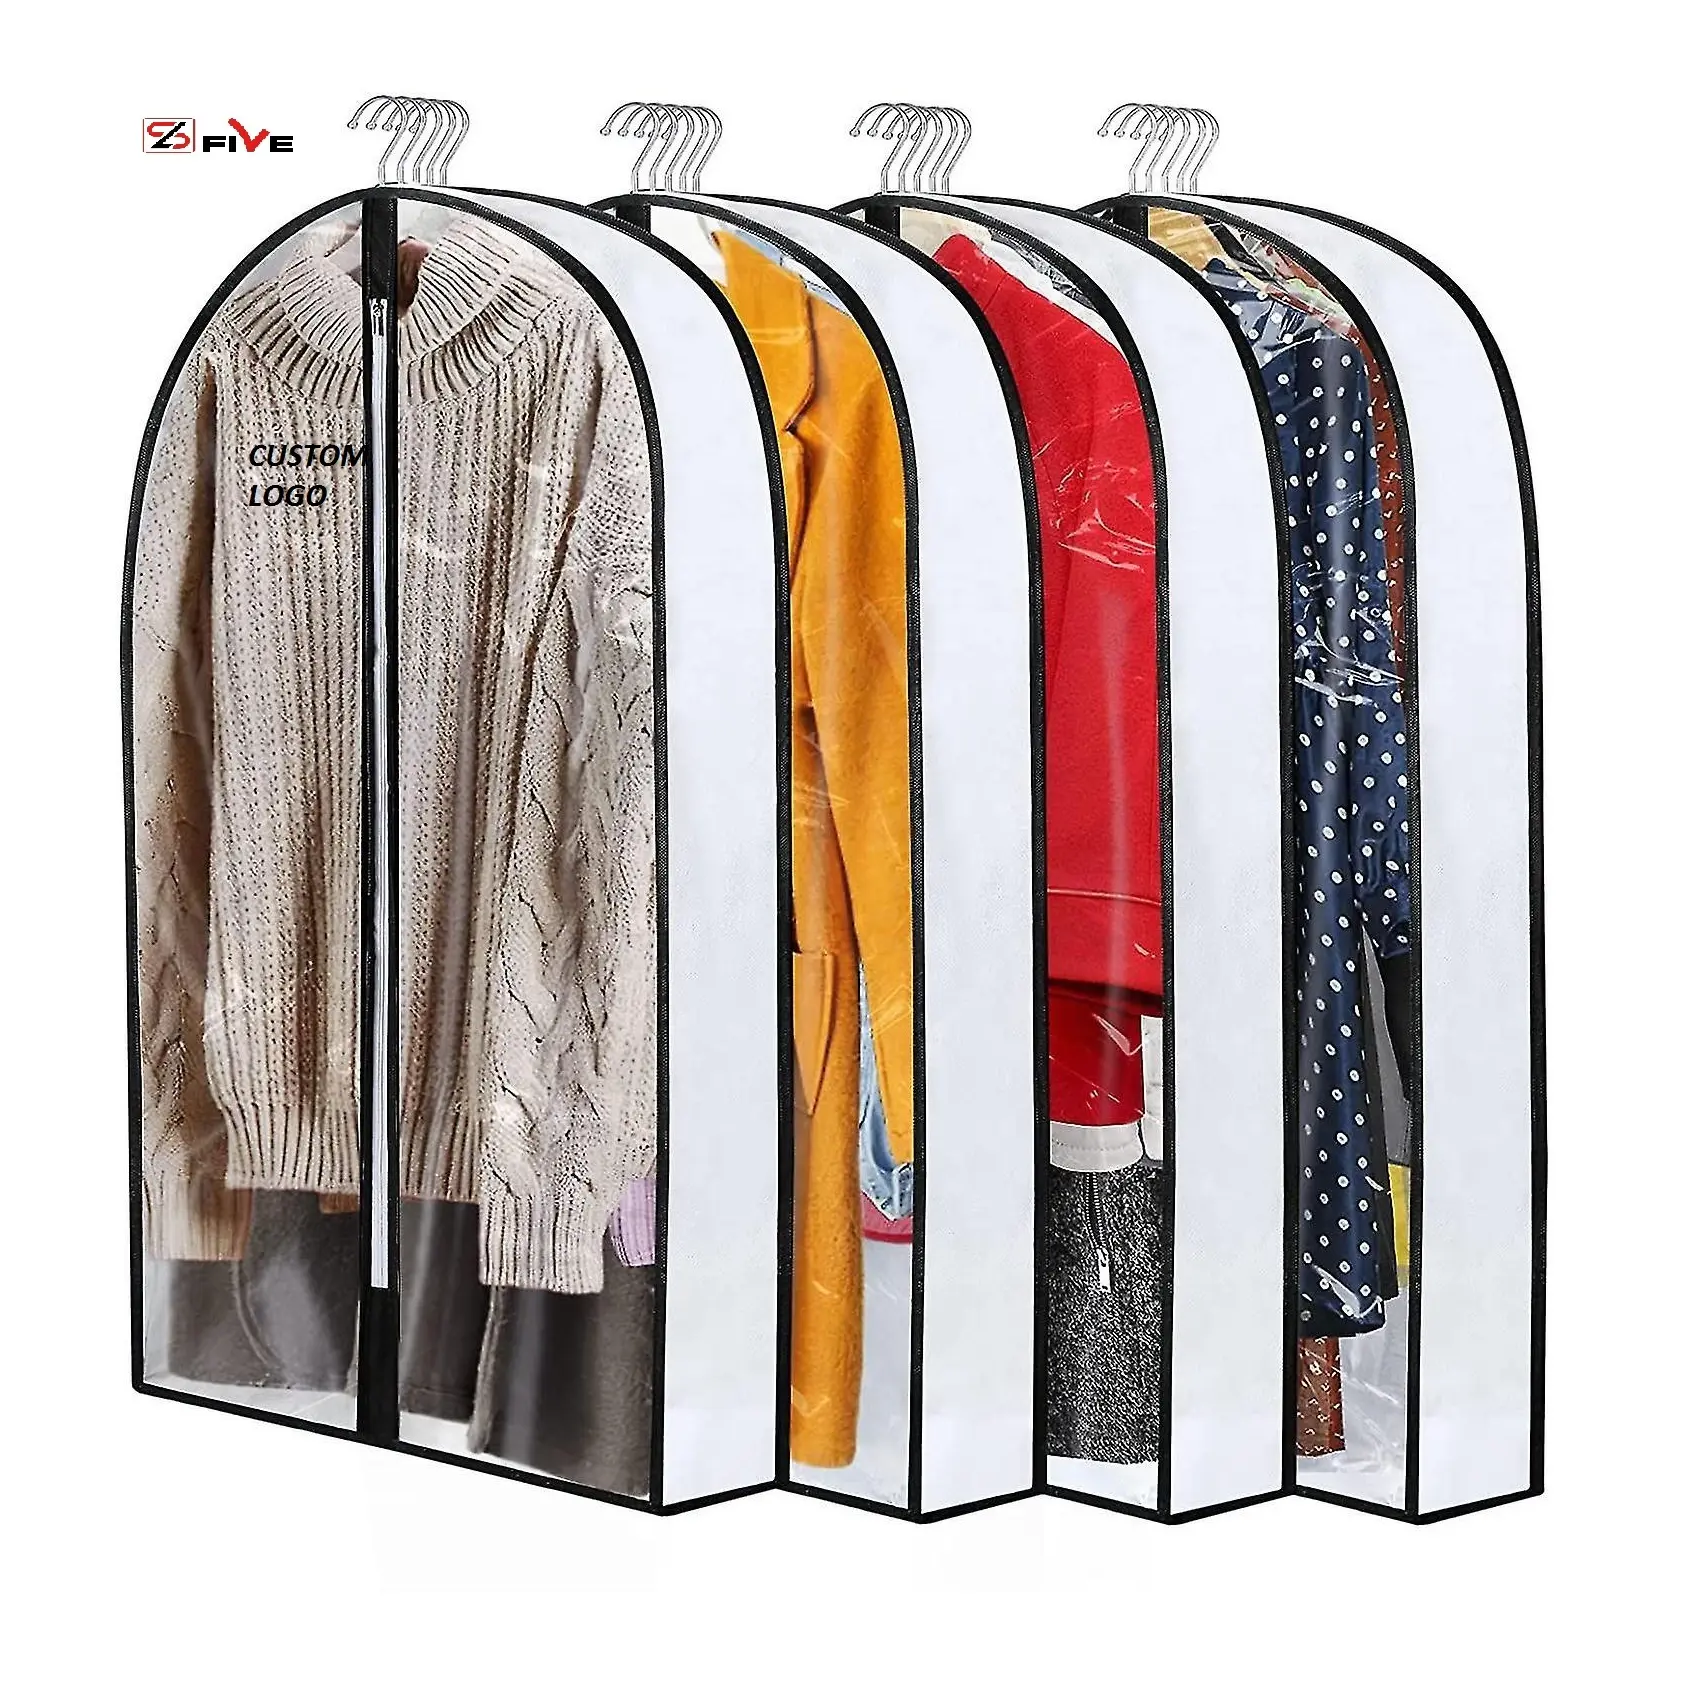 Clear plastic Dress Cover garment laundry covers hanging dust bags for clothes suits dress